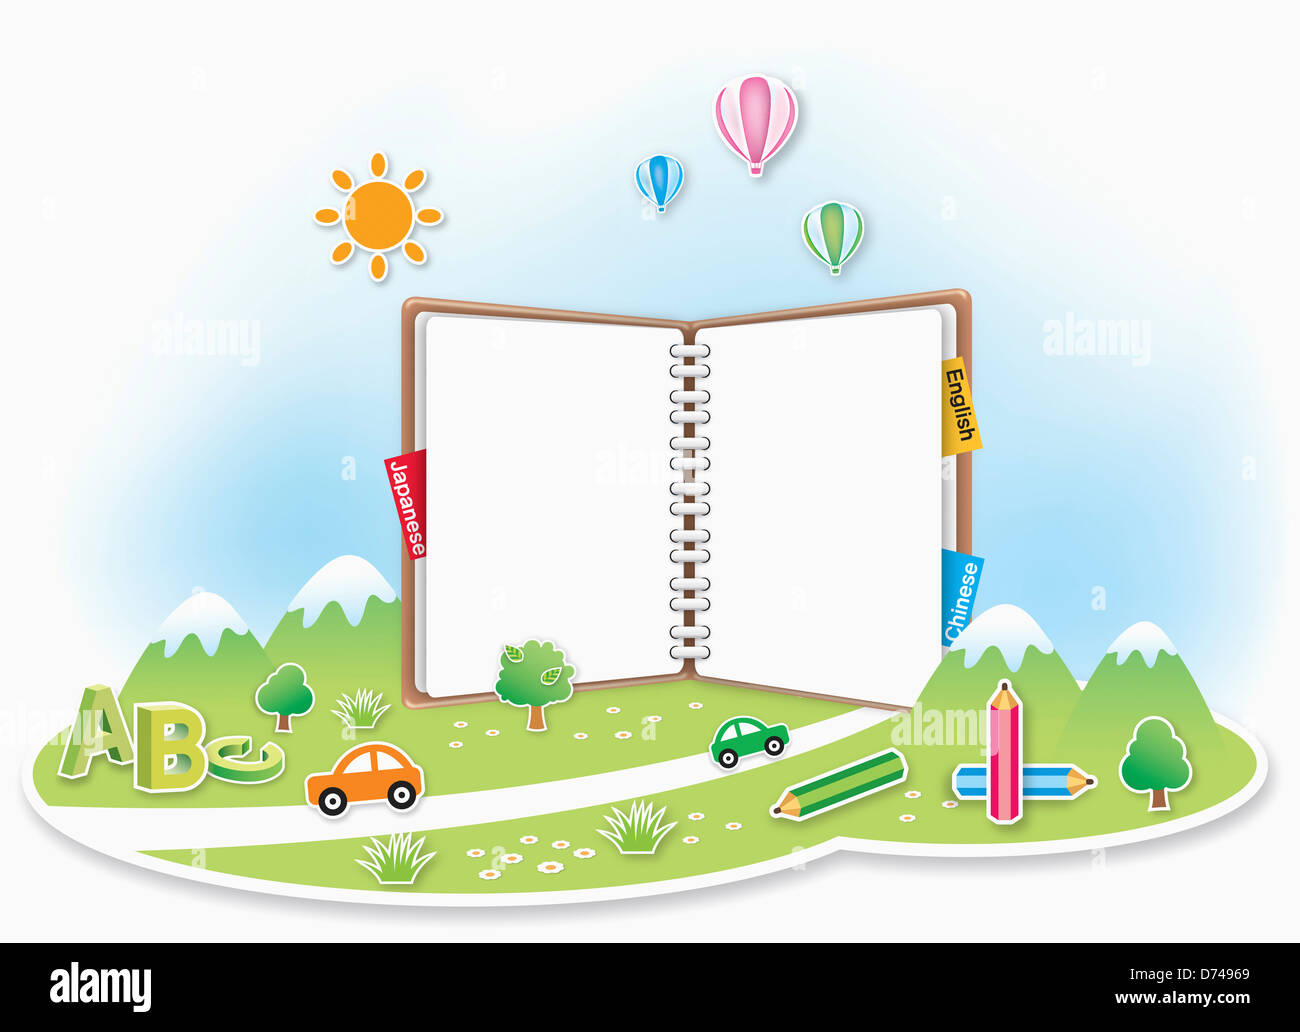 illustration of study land featuring notebook Stock Photo